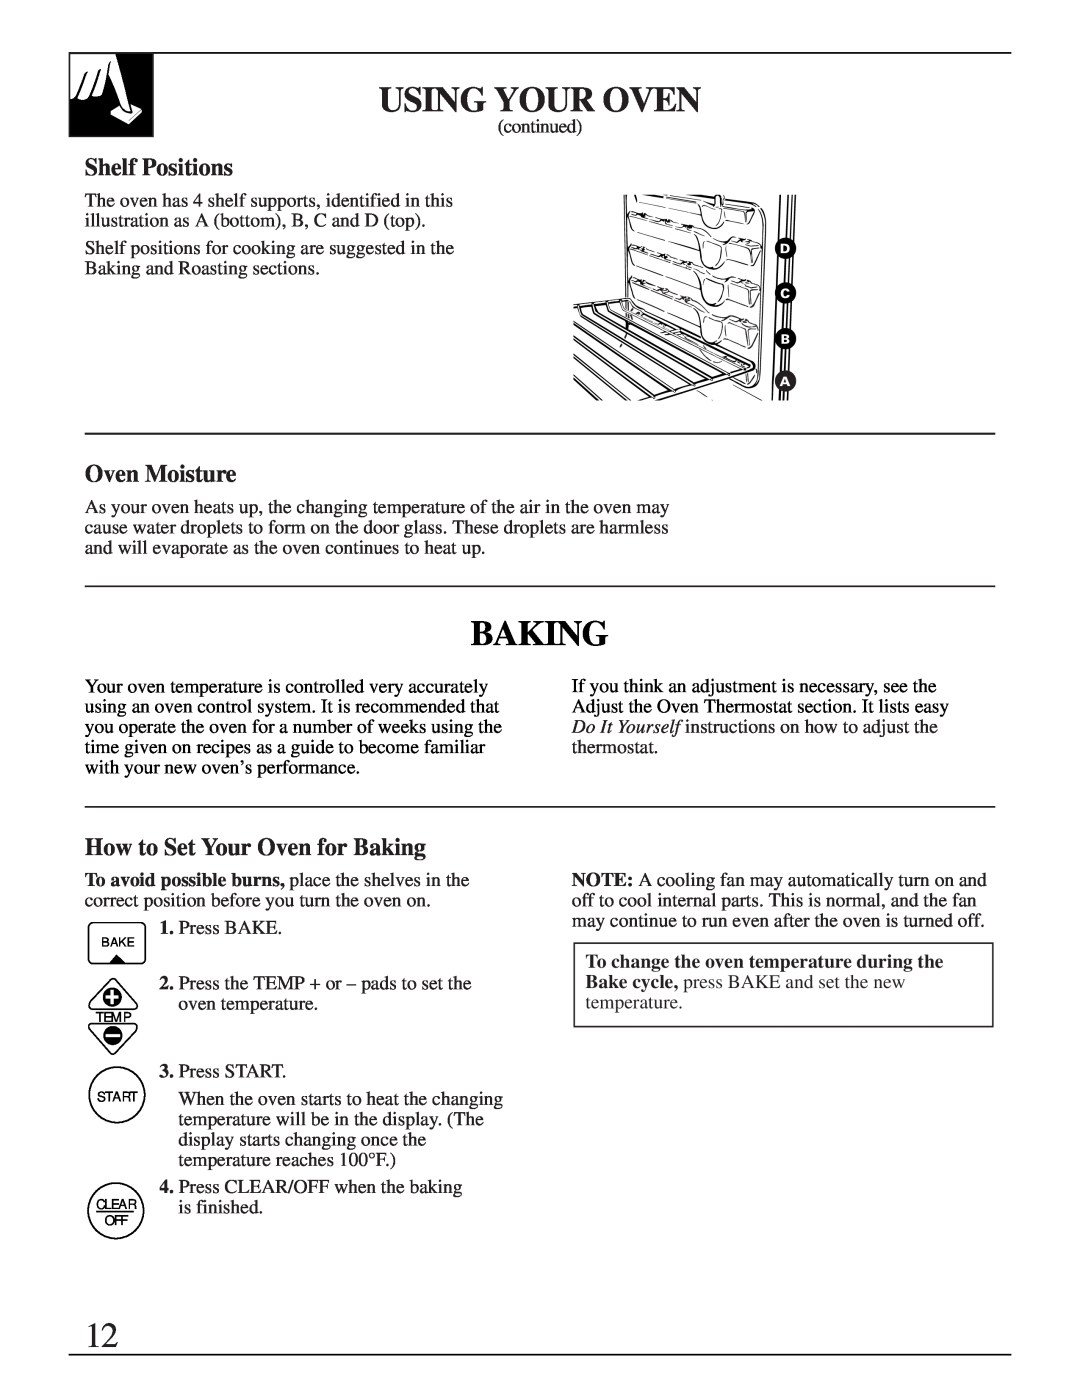 GE JGRS14 warranty Shelf Positions, Oven Moisture, How to Set Your Oven for Baking, Using Your Oven 